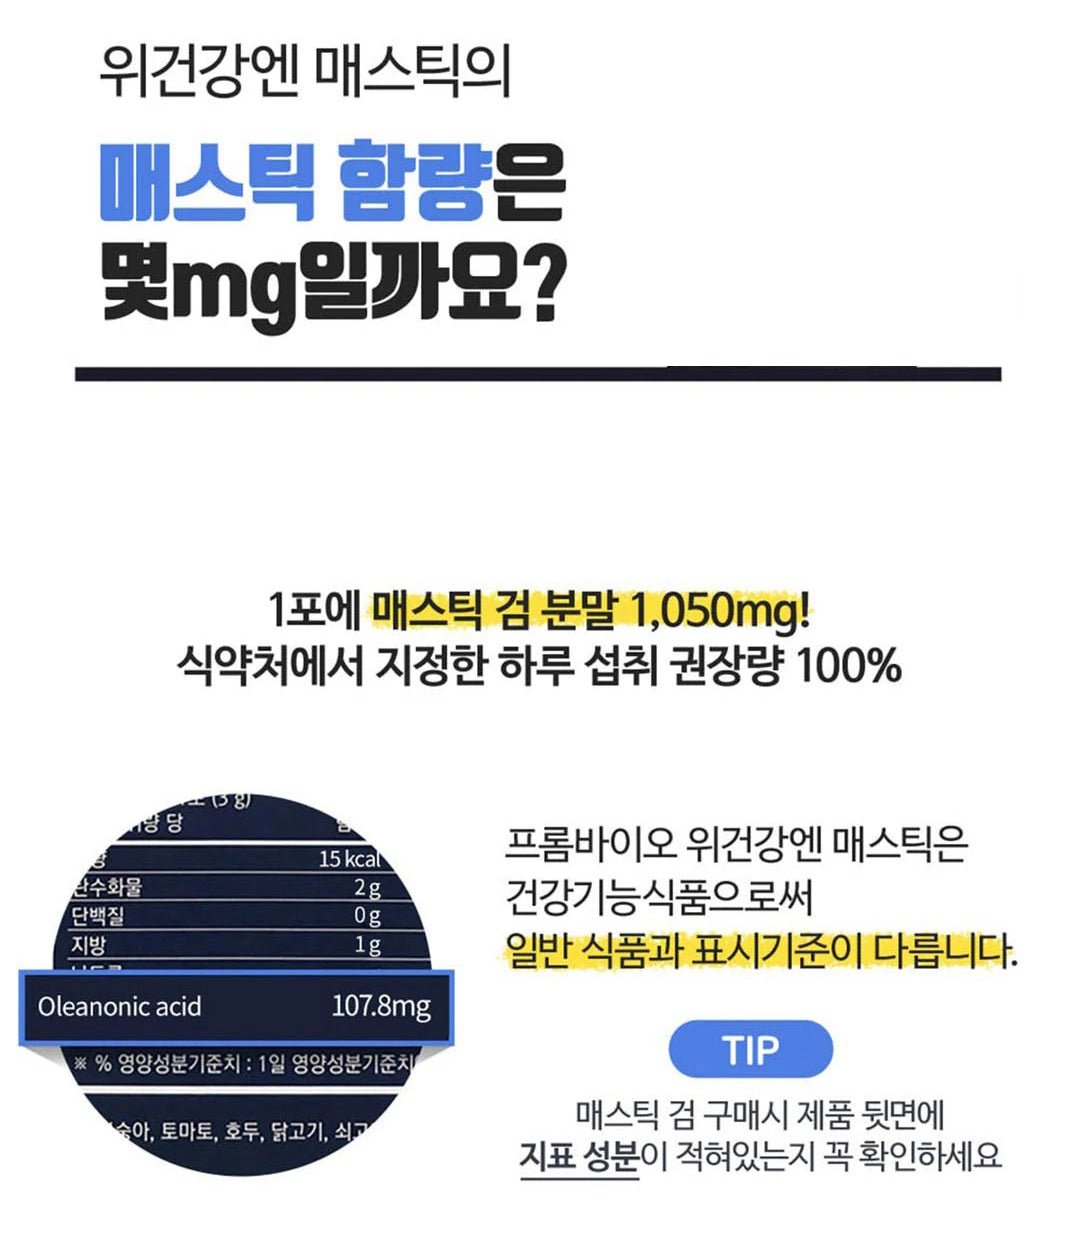 [B1G1] FromBIO (2+1) for Stomach, Mastic, 1,050mg of Mastic and 107.8mg of Oleanolic Acid per Serving (90 Packets)